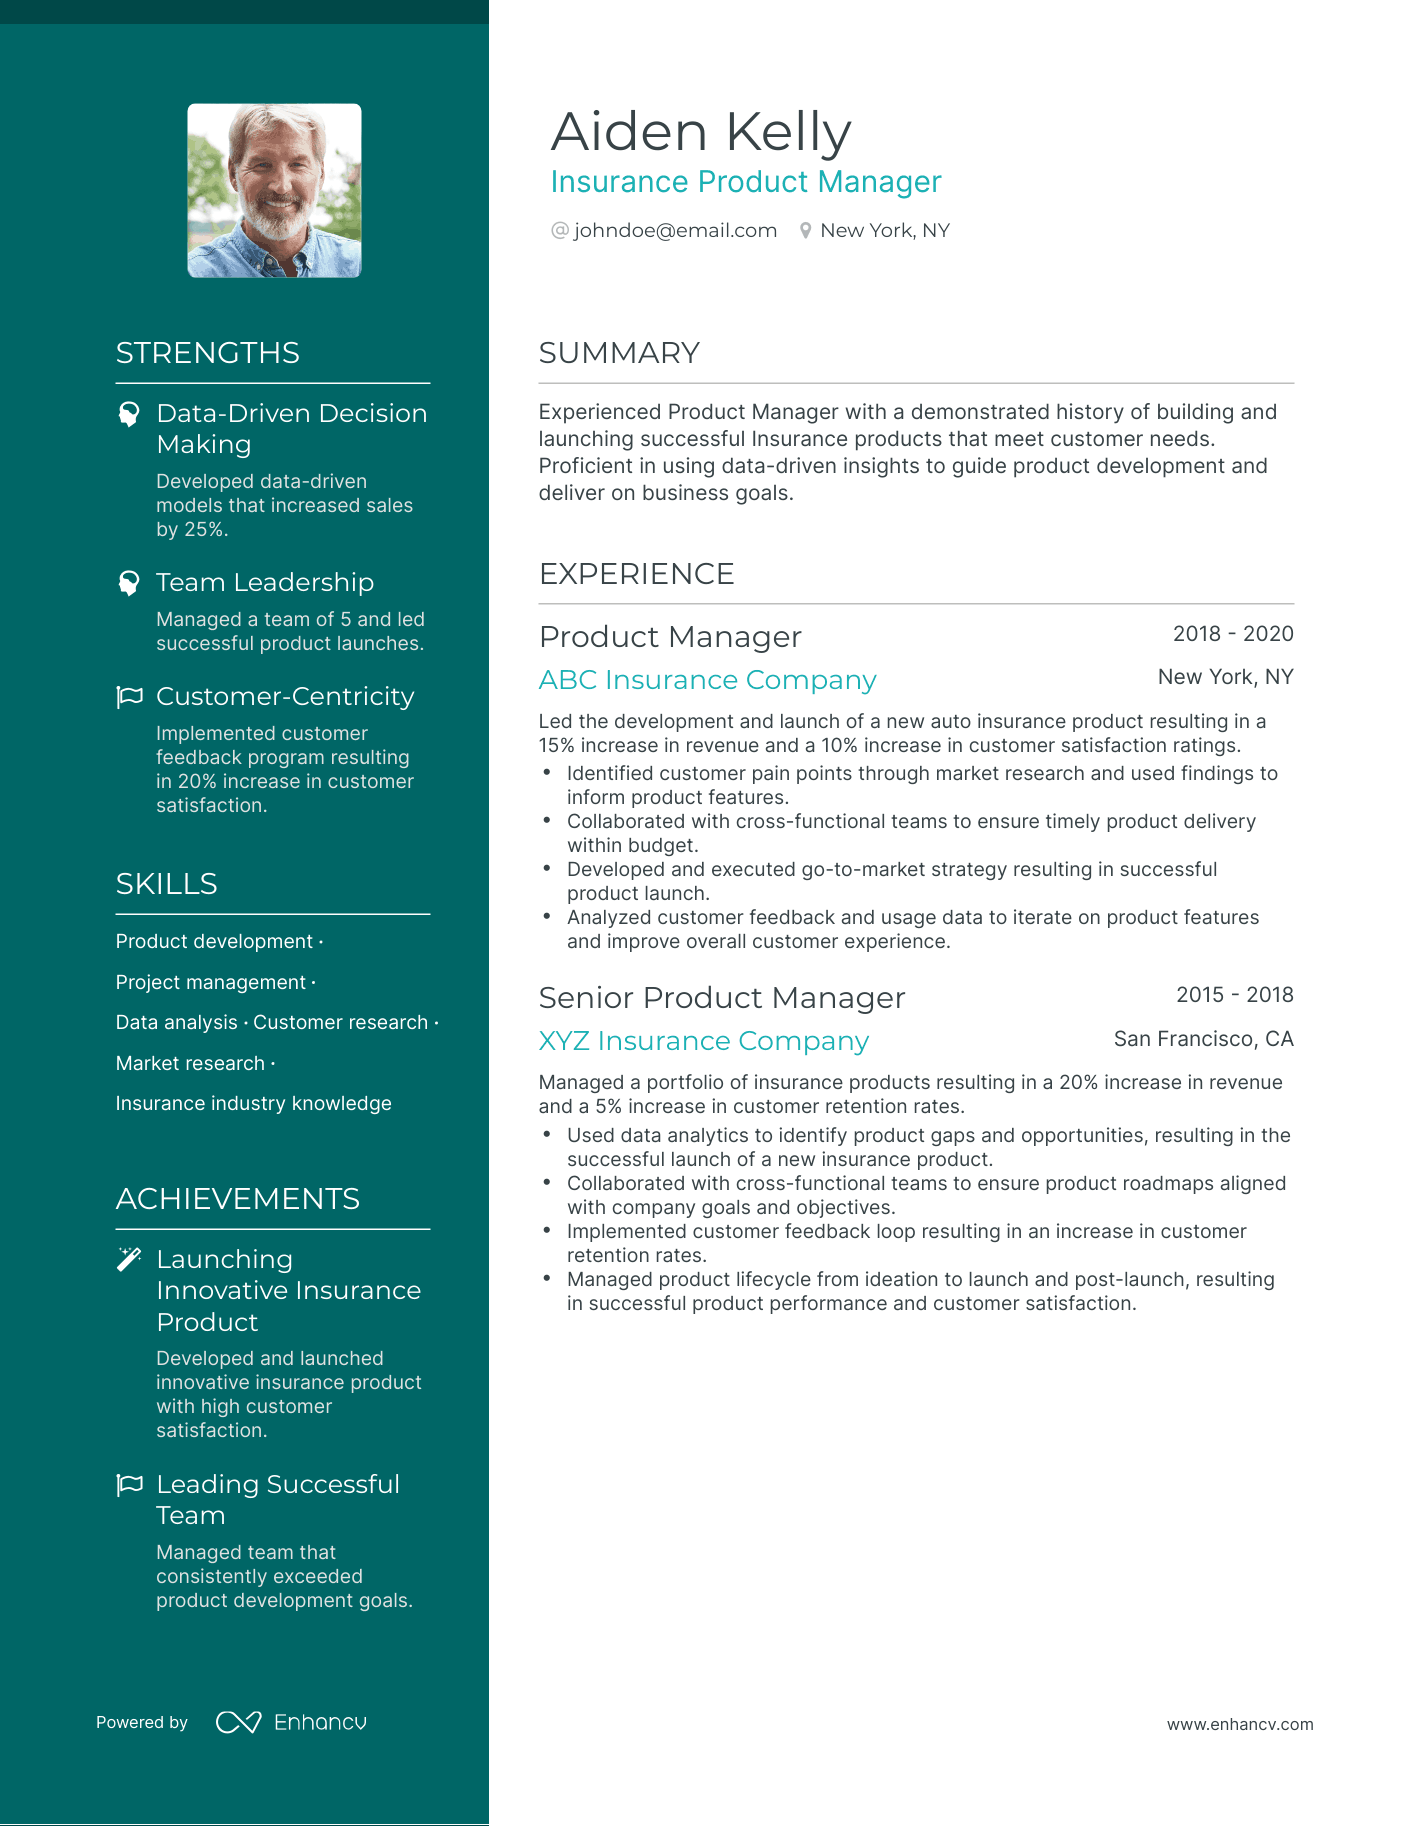 Polished Insurance Product Manager Resume Template